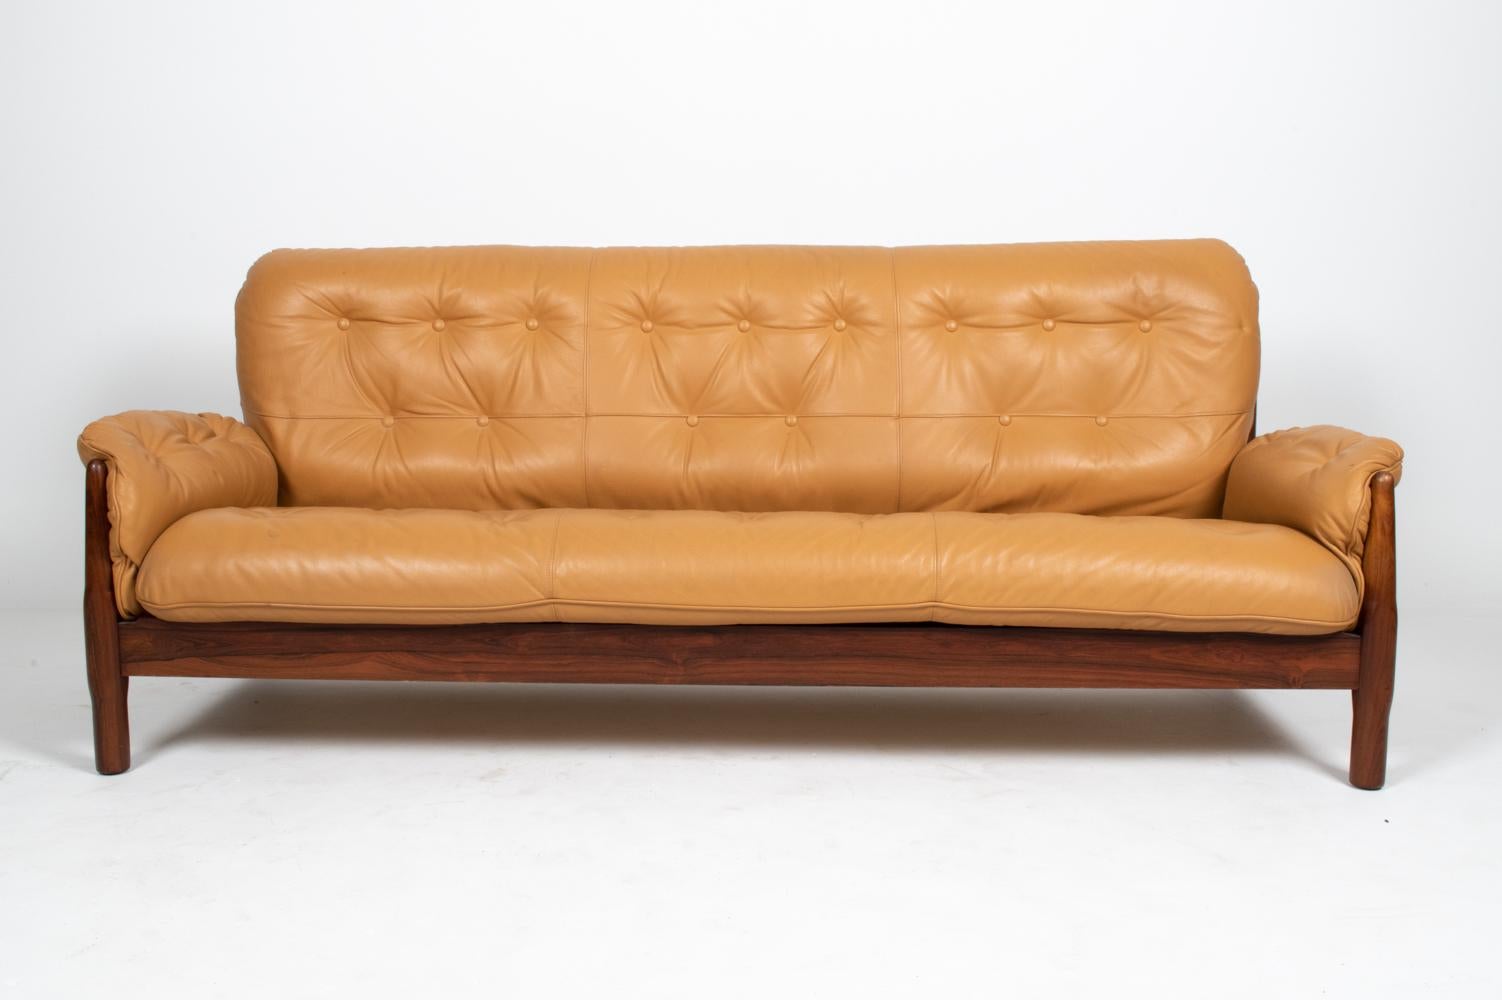 Brazilian Modernist Rosewood & Leather Sofa, circa 1970s In Good Condition For Sale In Norwalk, CT